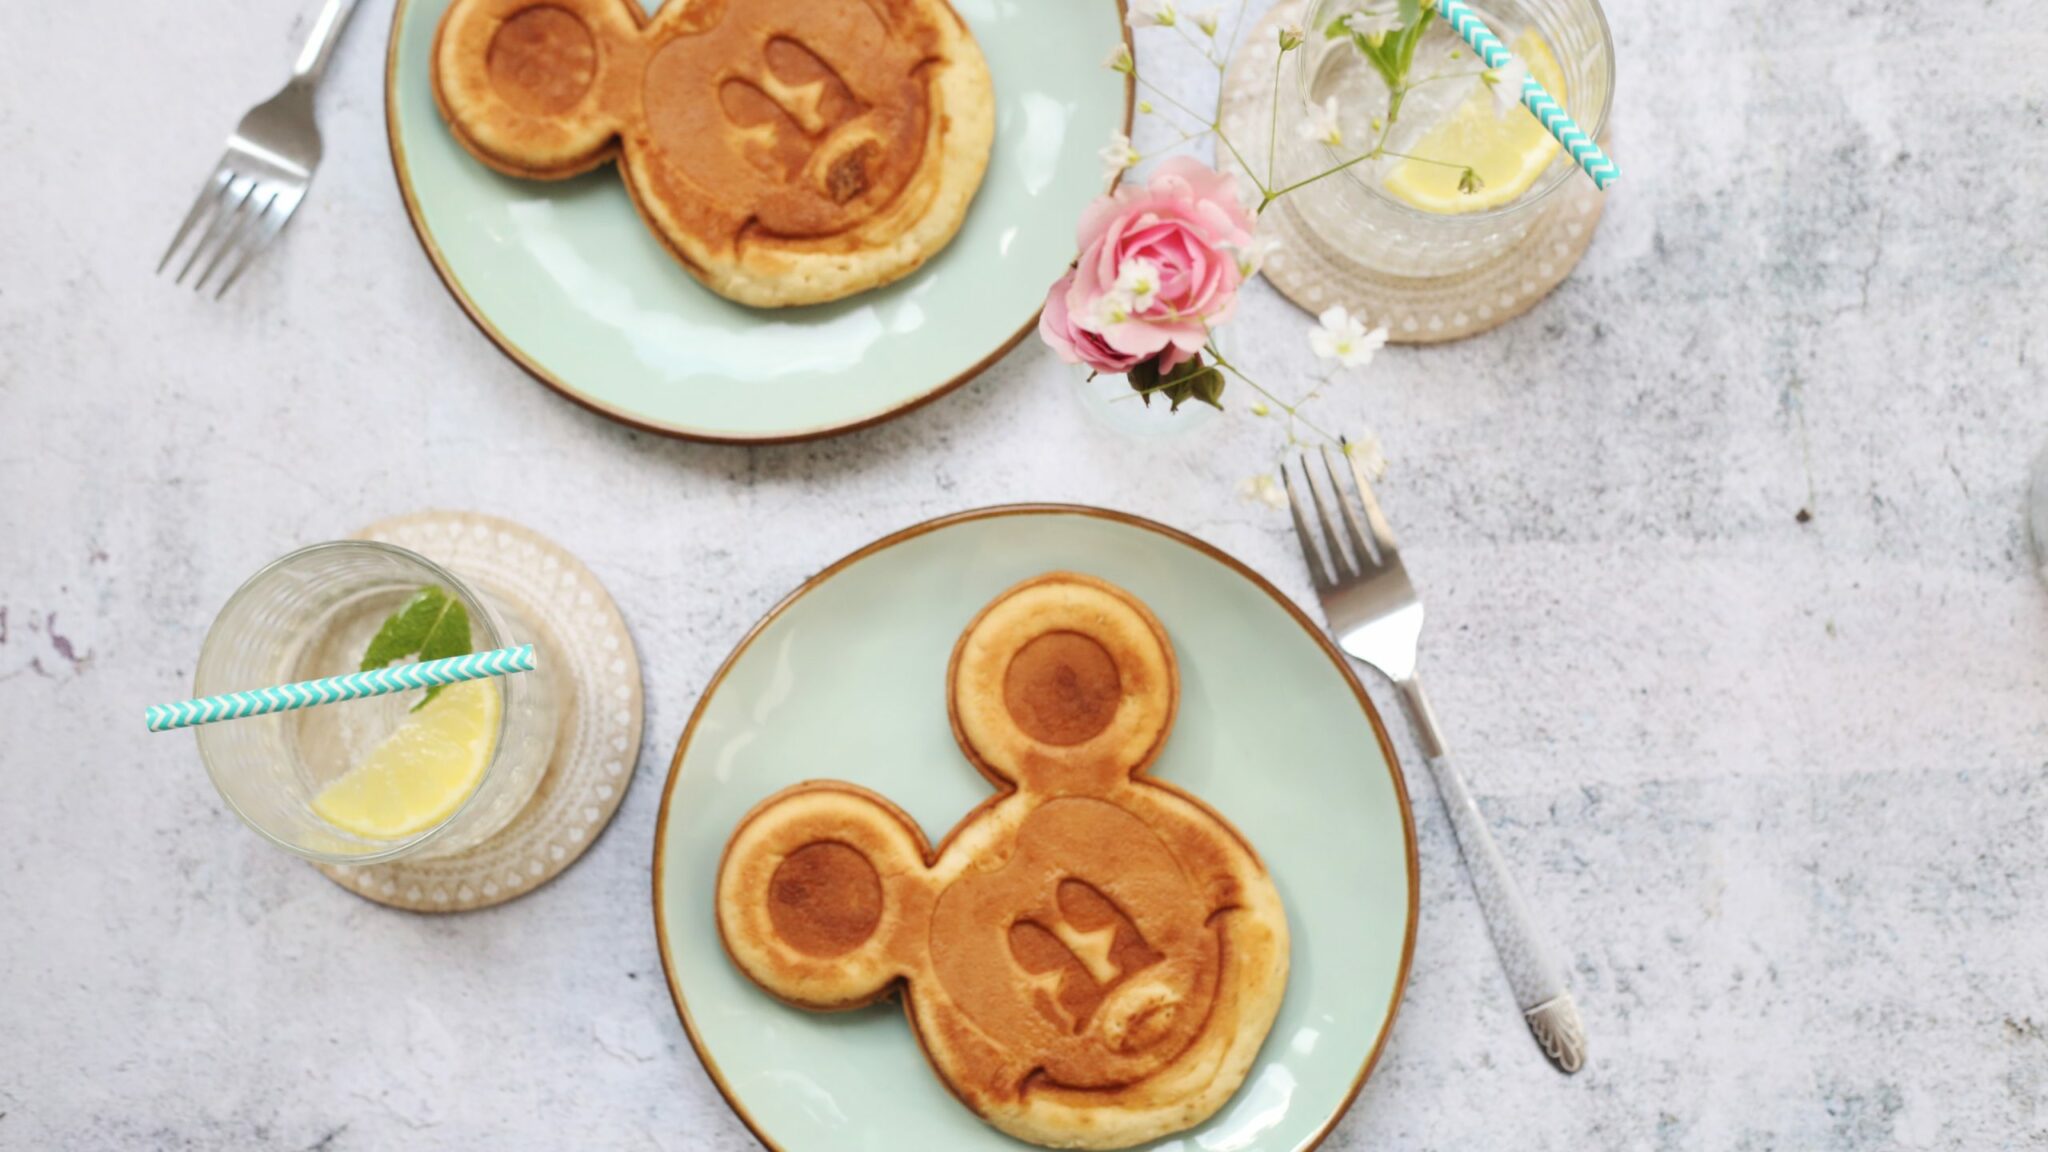 How to Find the Best Places to Eat at Disneyland and Disney World